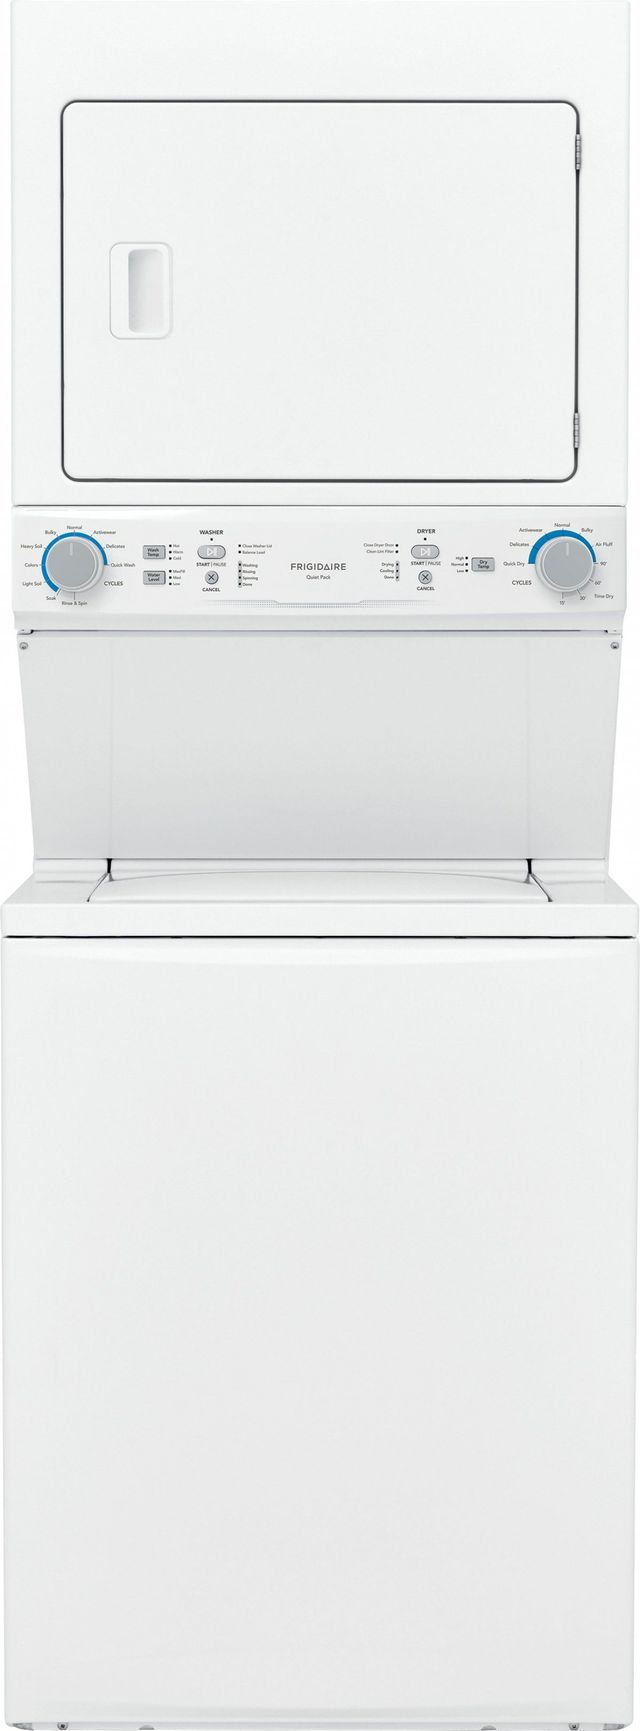 Frigidaire® 3.9 Cu. Ft. Washer, 5.6 Cu. Ft. Dryer White Electric Stack Laundry 1